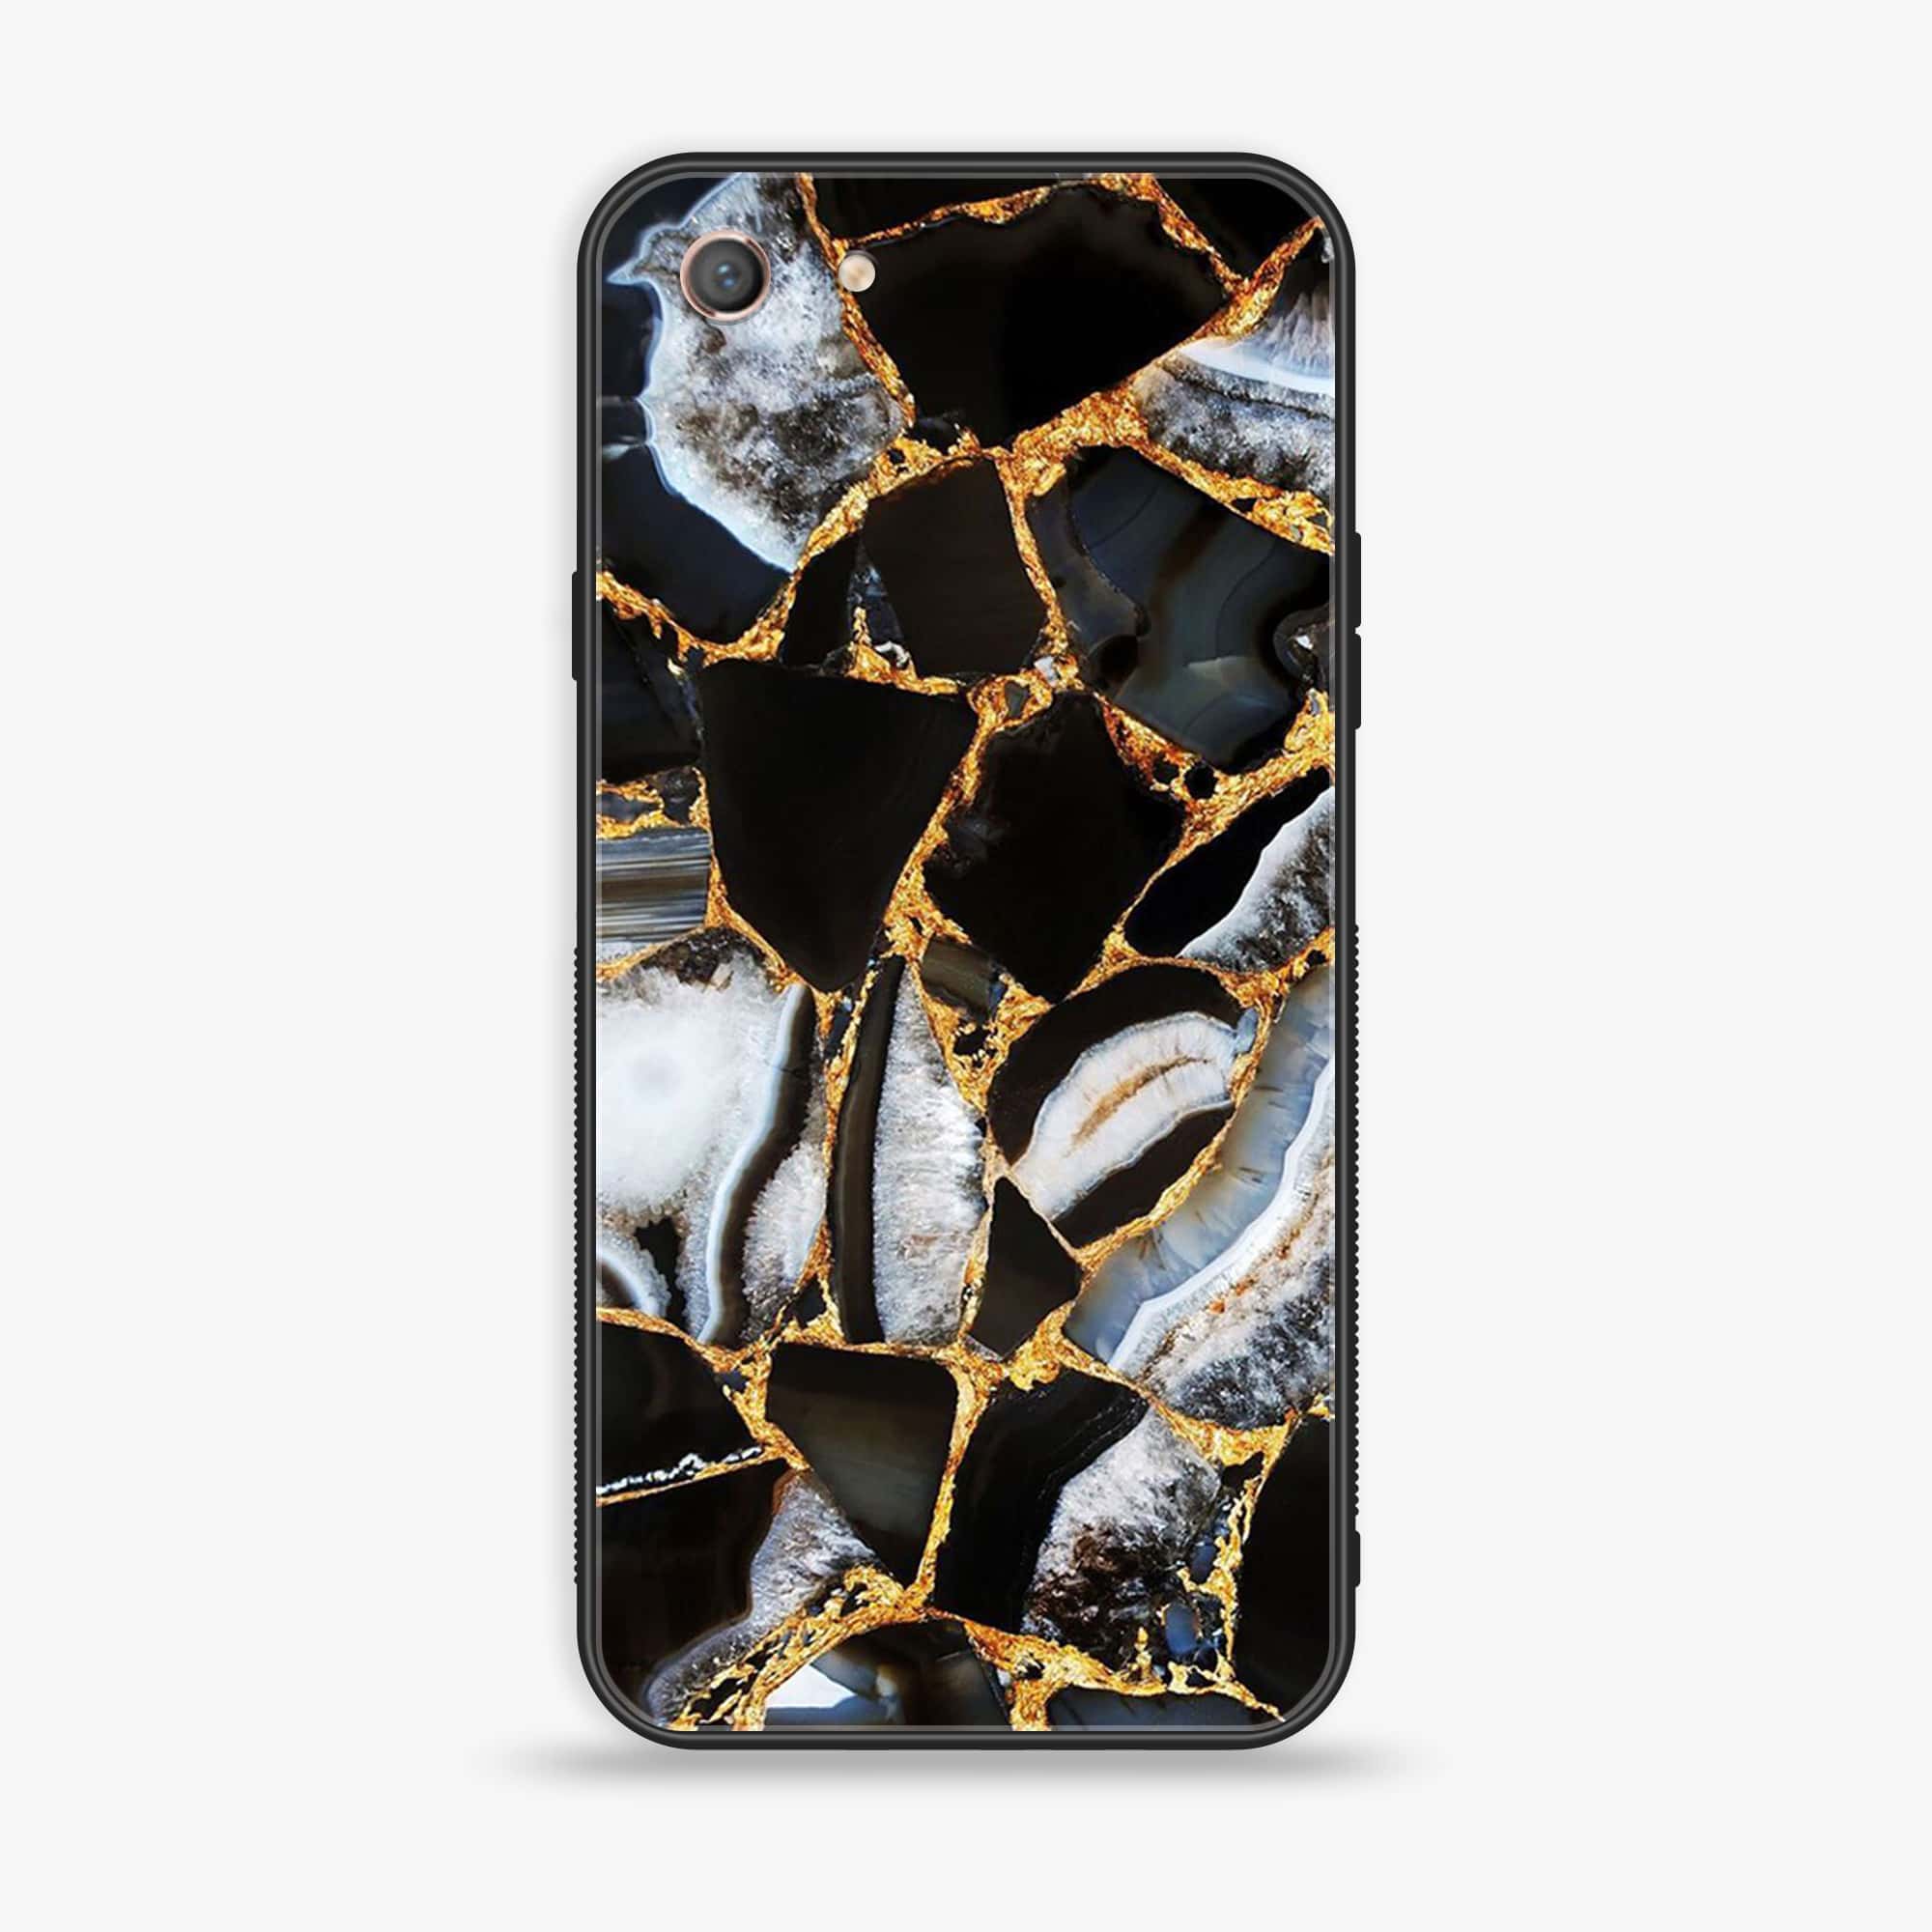 Oppo A71 (2018) - Black Marble Series - Premium Printed Glass soft Bumper shock Proof Case